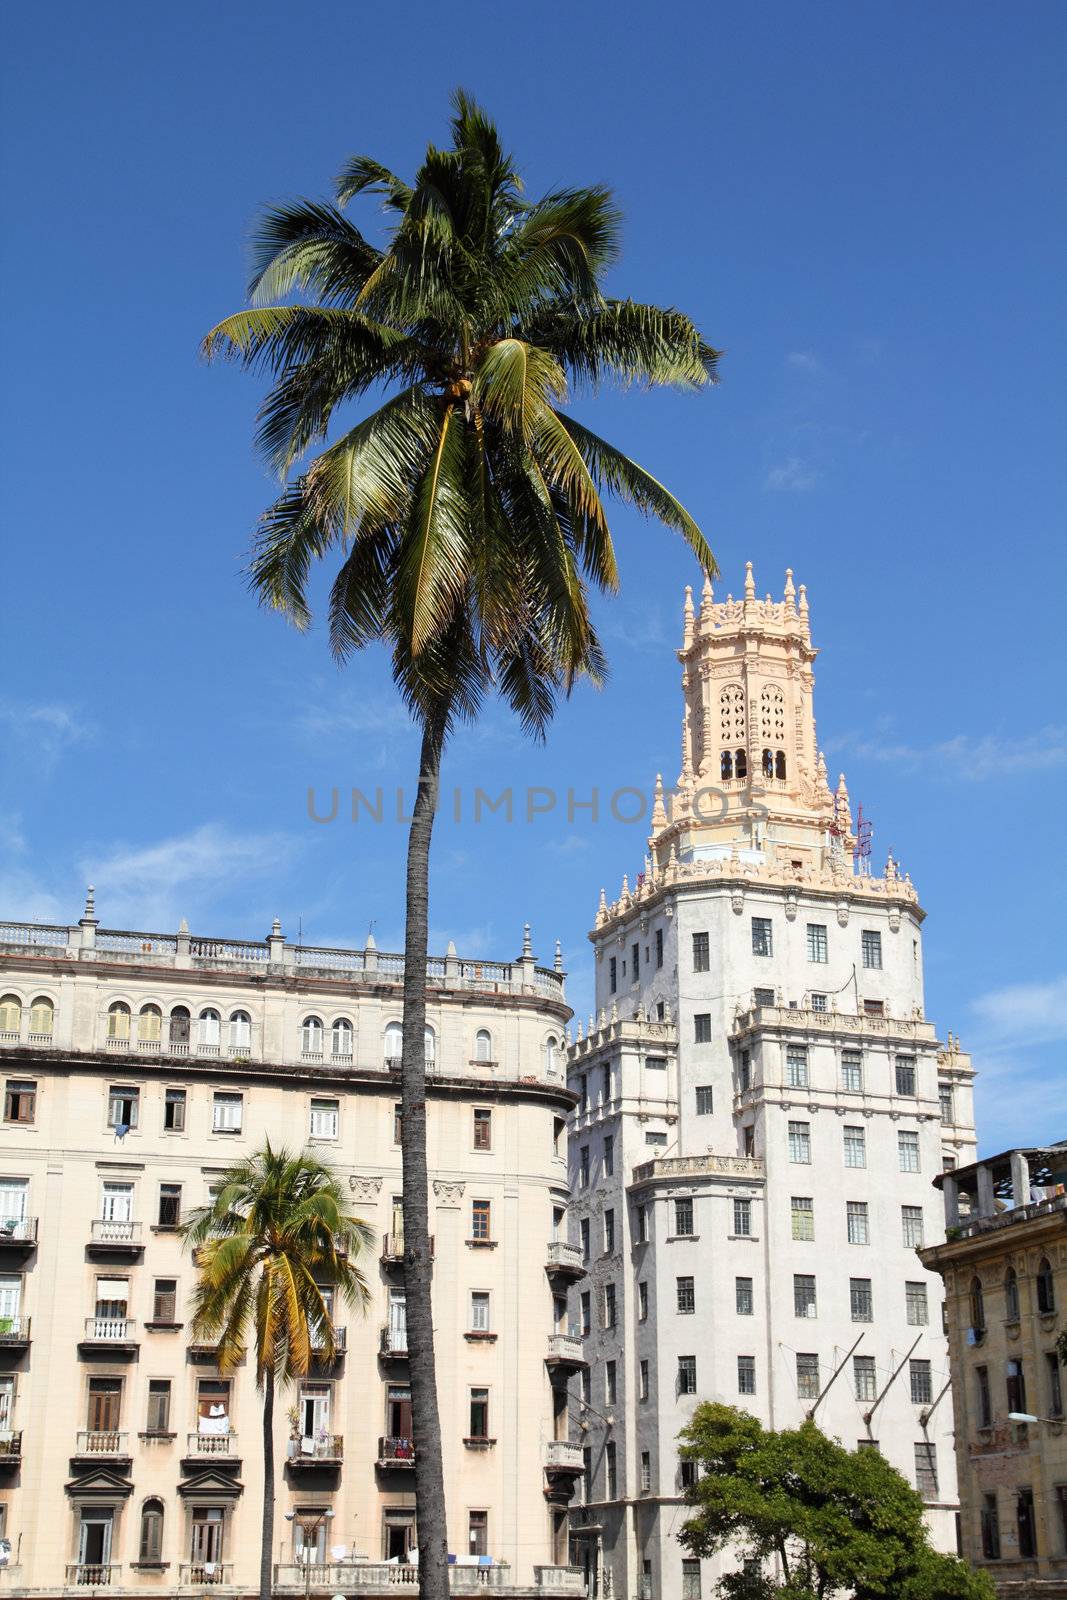 Havana, Cuba - city architecture. Eclectic buildings and palm trees.